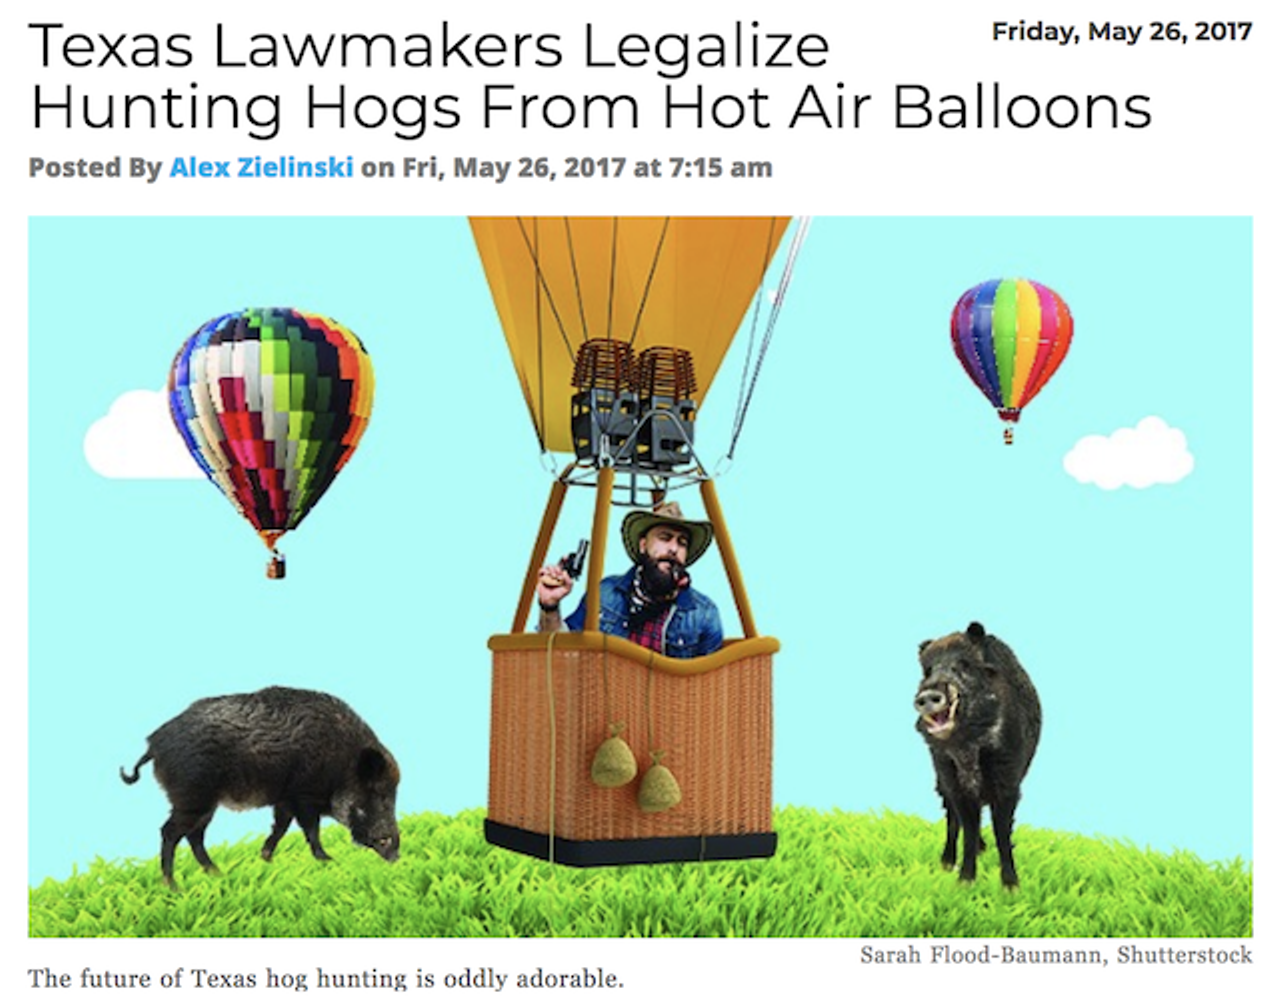 The right to hunt hogs from a hot air balloon in Texas was strangely unchallenged in both legislative chambers. As always, our representatives have our best interests at heart. Read more.